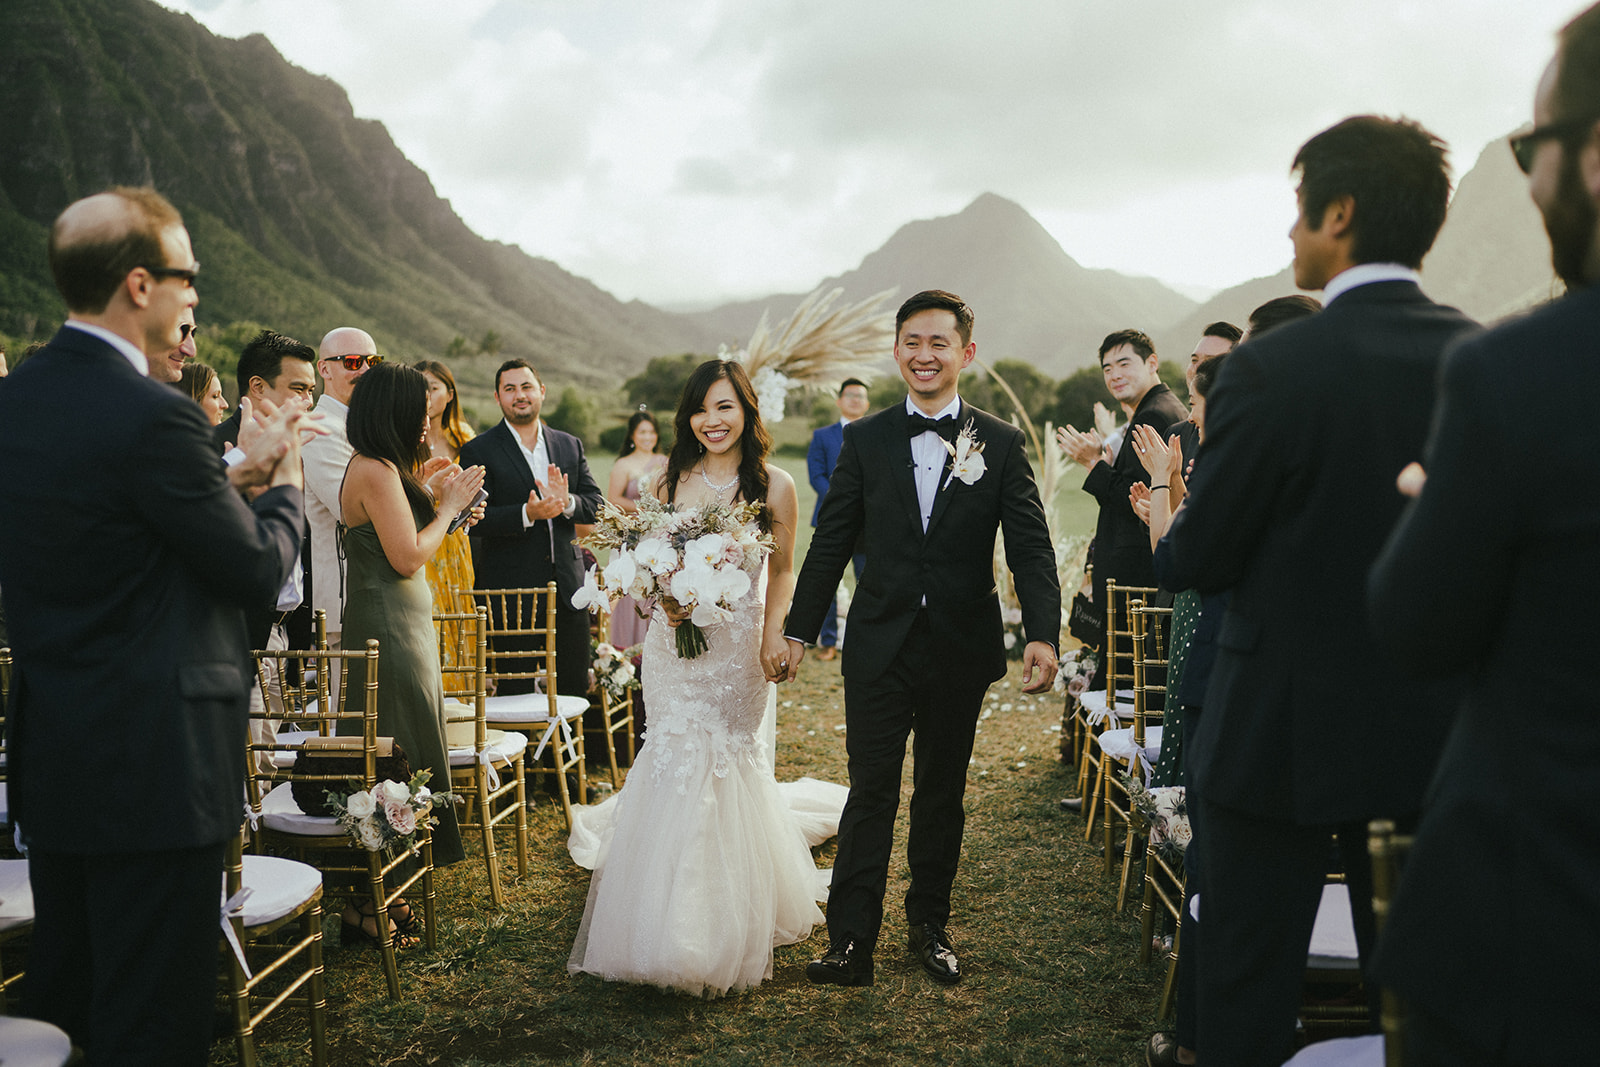 Bride and groom just got hitched at Wedding ceremony in Kualoa Ranch Hawaii